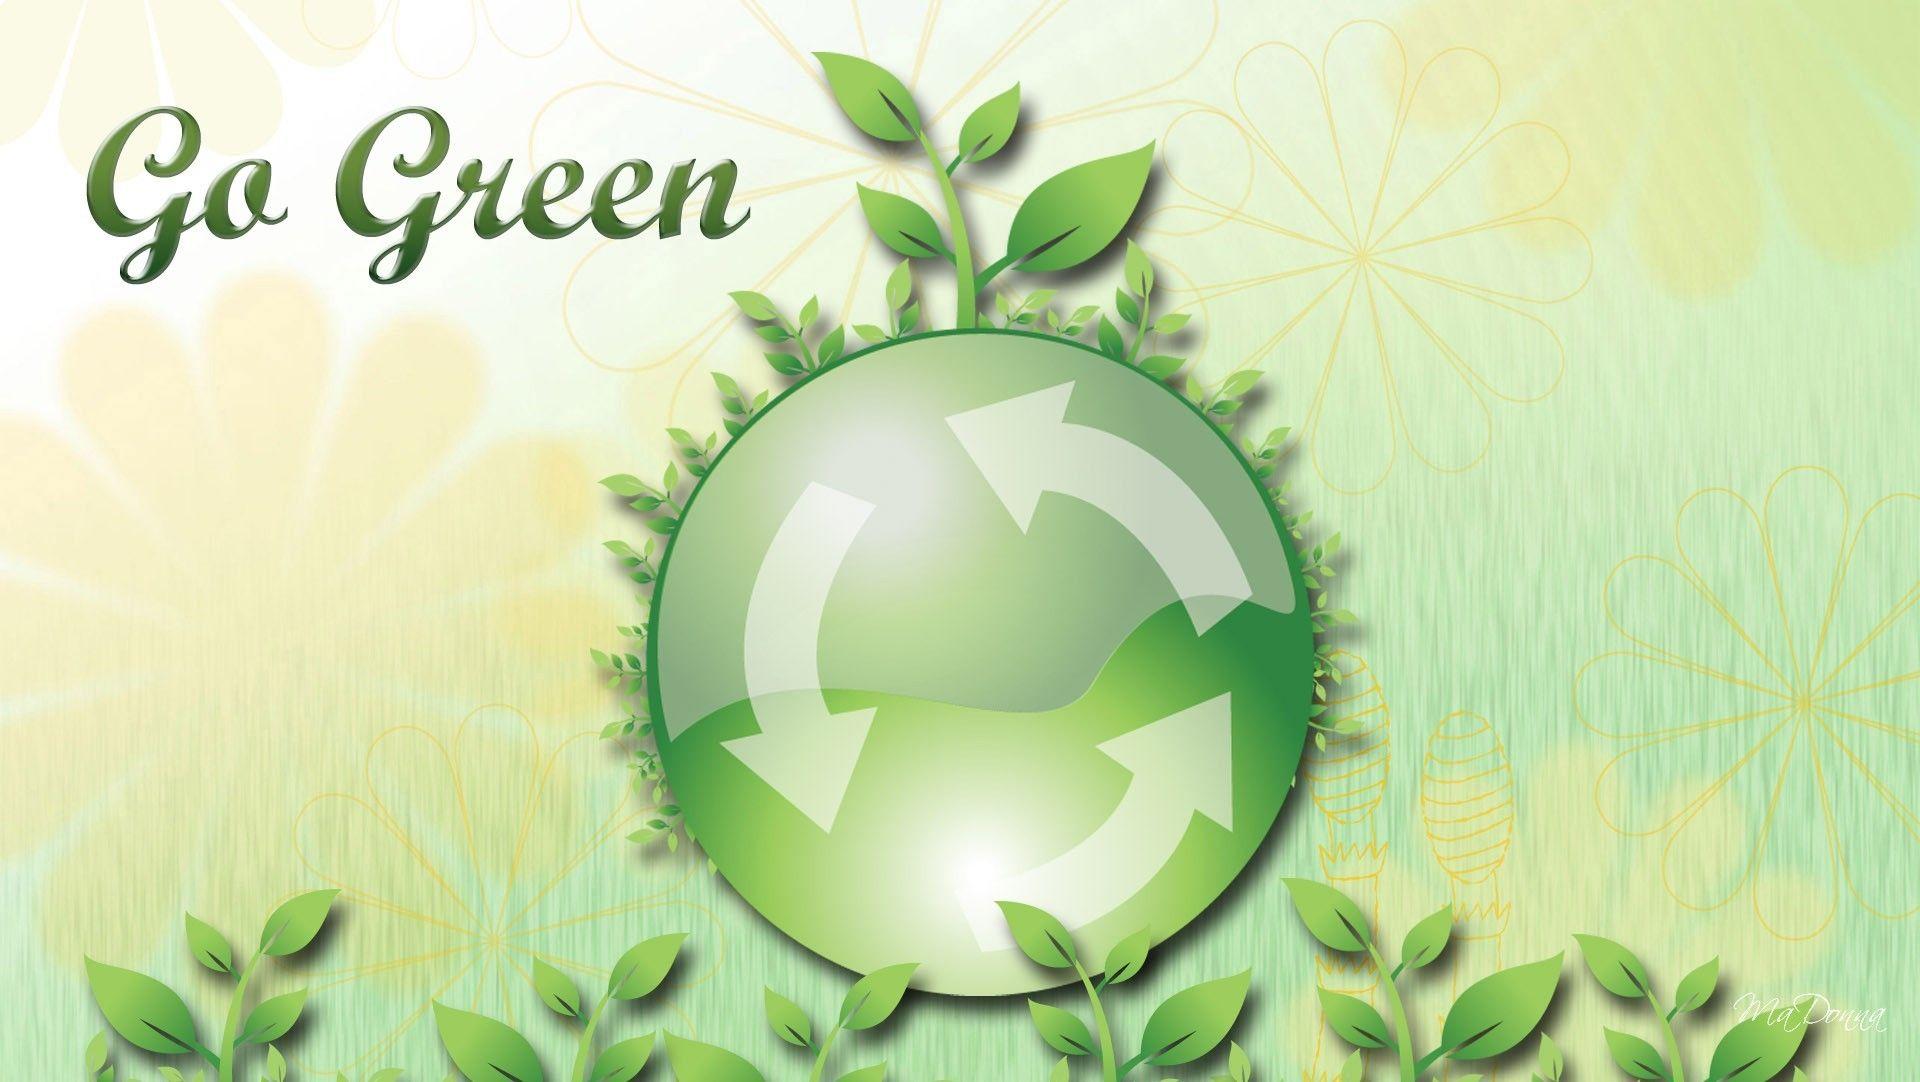 Misc: Green Recycle Firefox Persona Earth Spring Clean Ecology Live